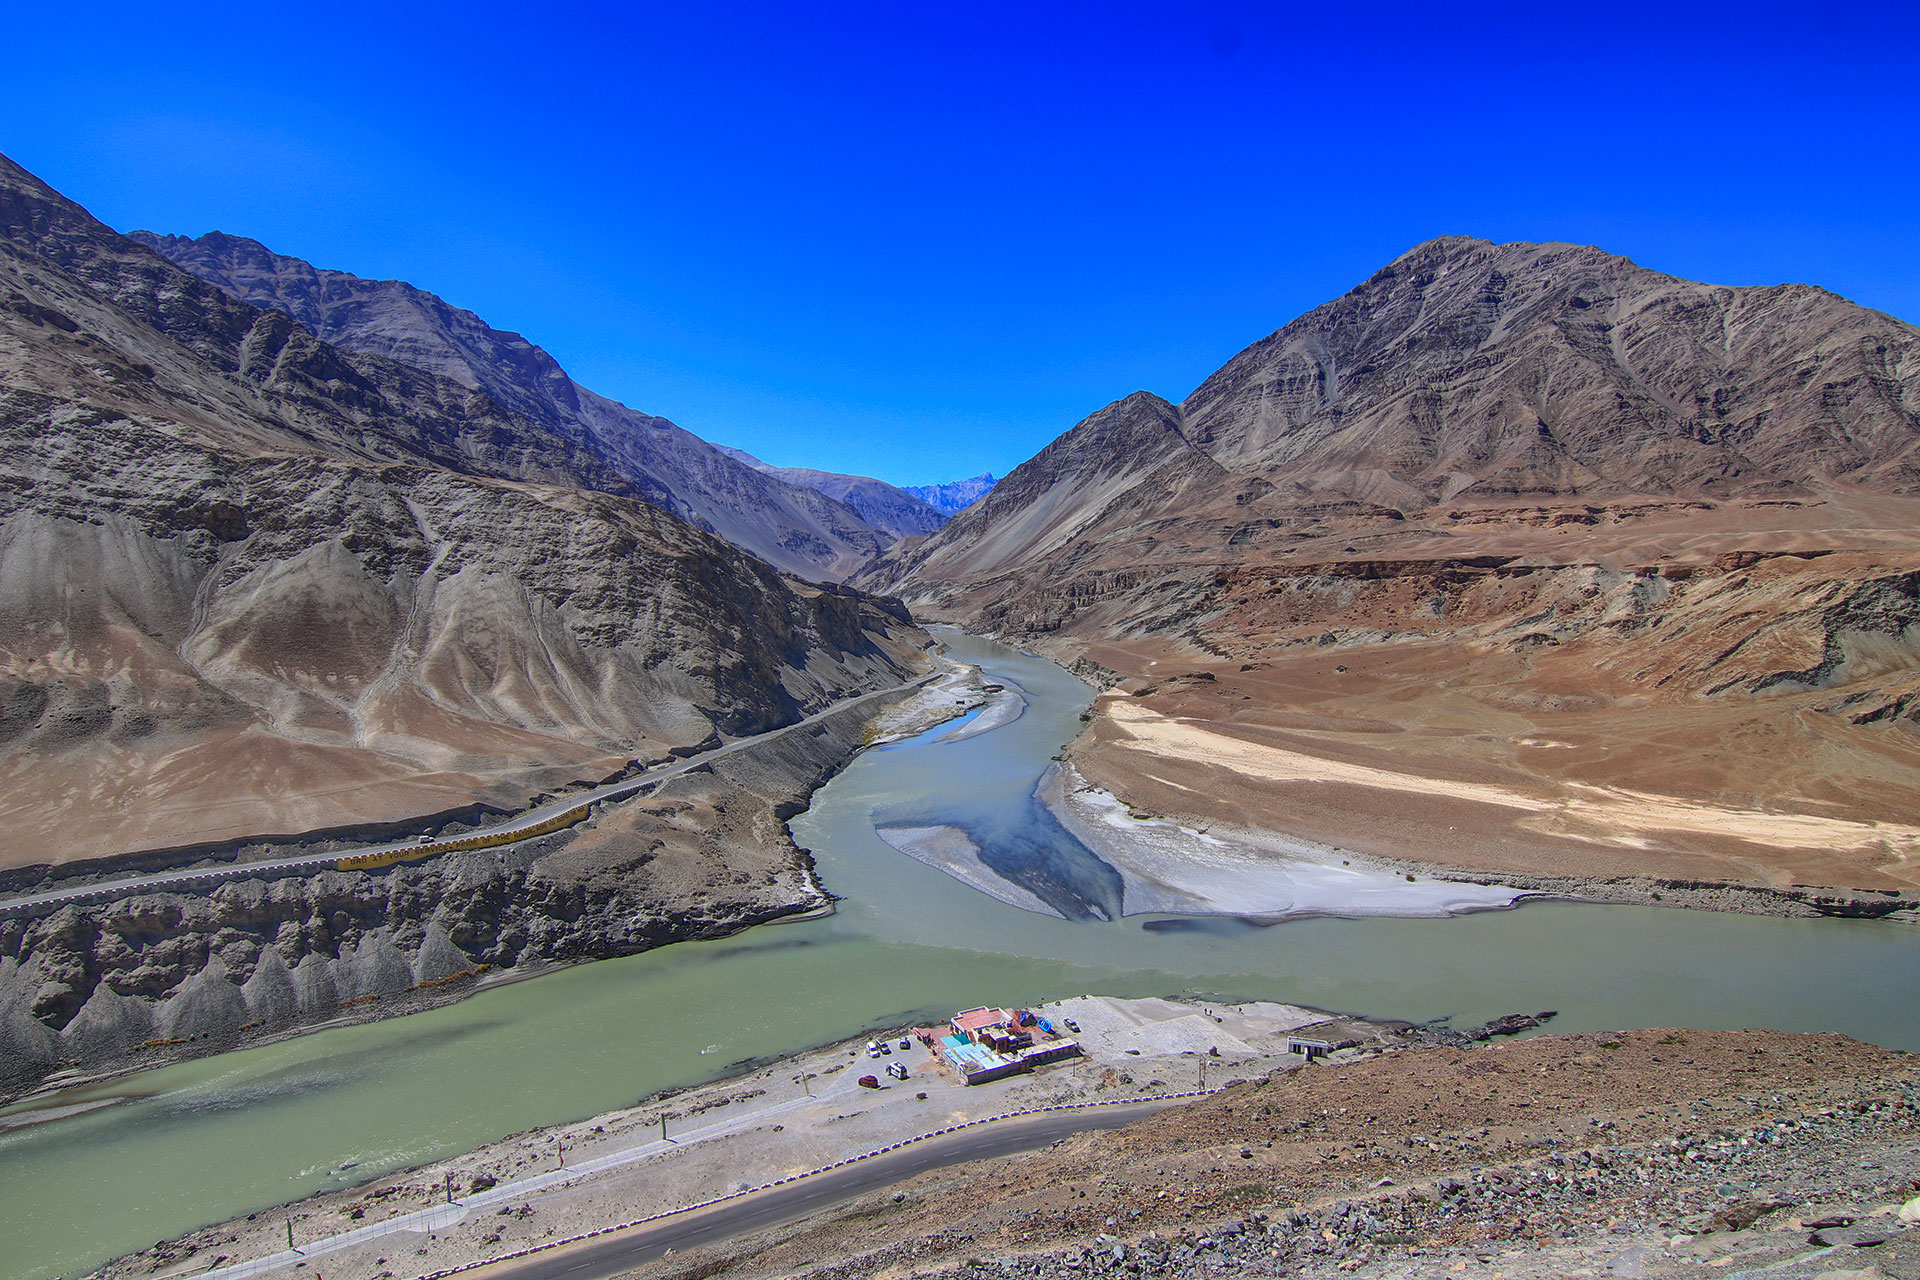 Sangam Point – Confluence of Indus and Zanskar Rivers